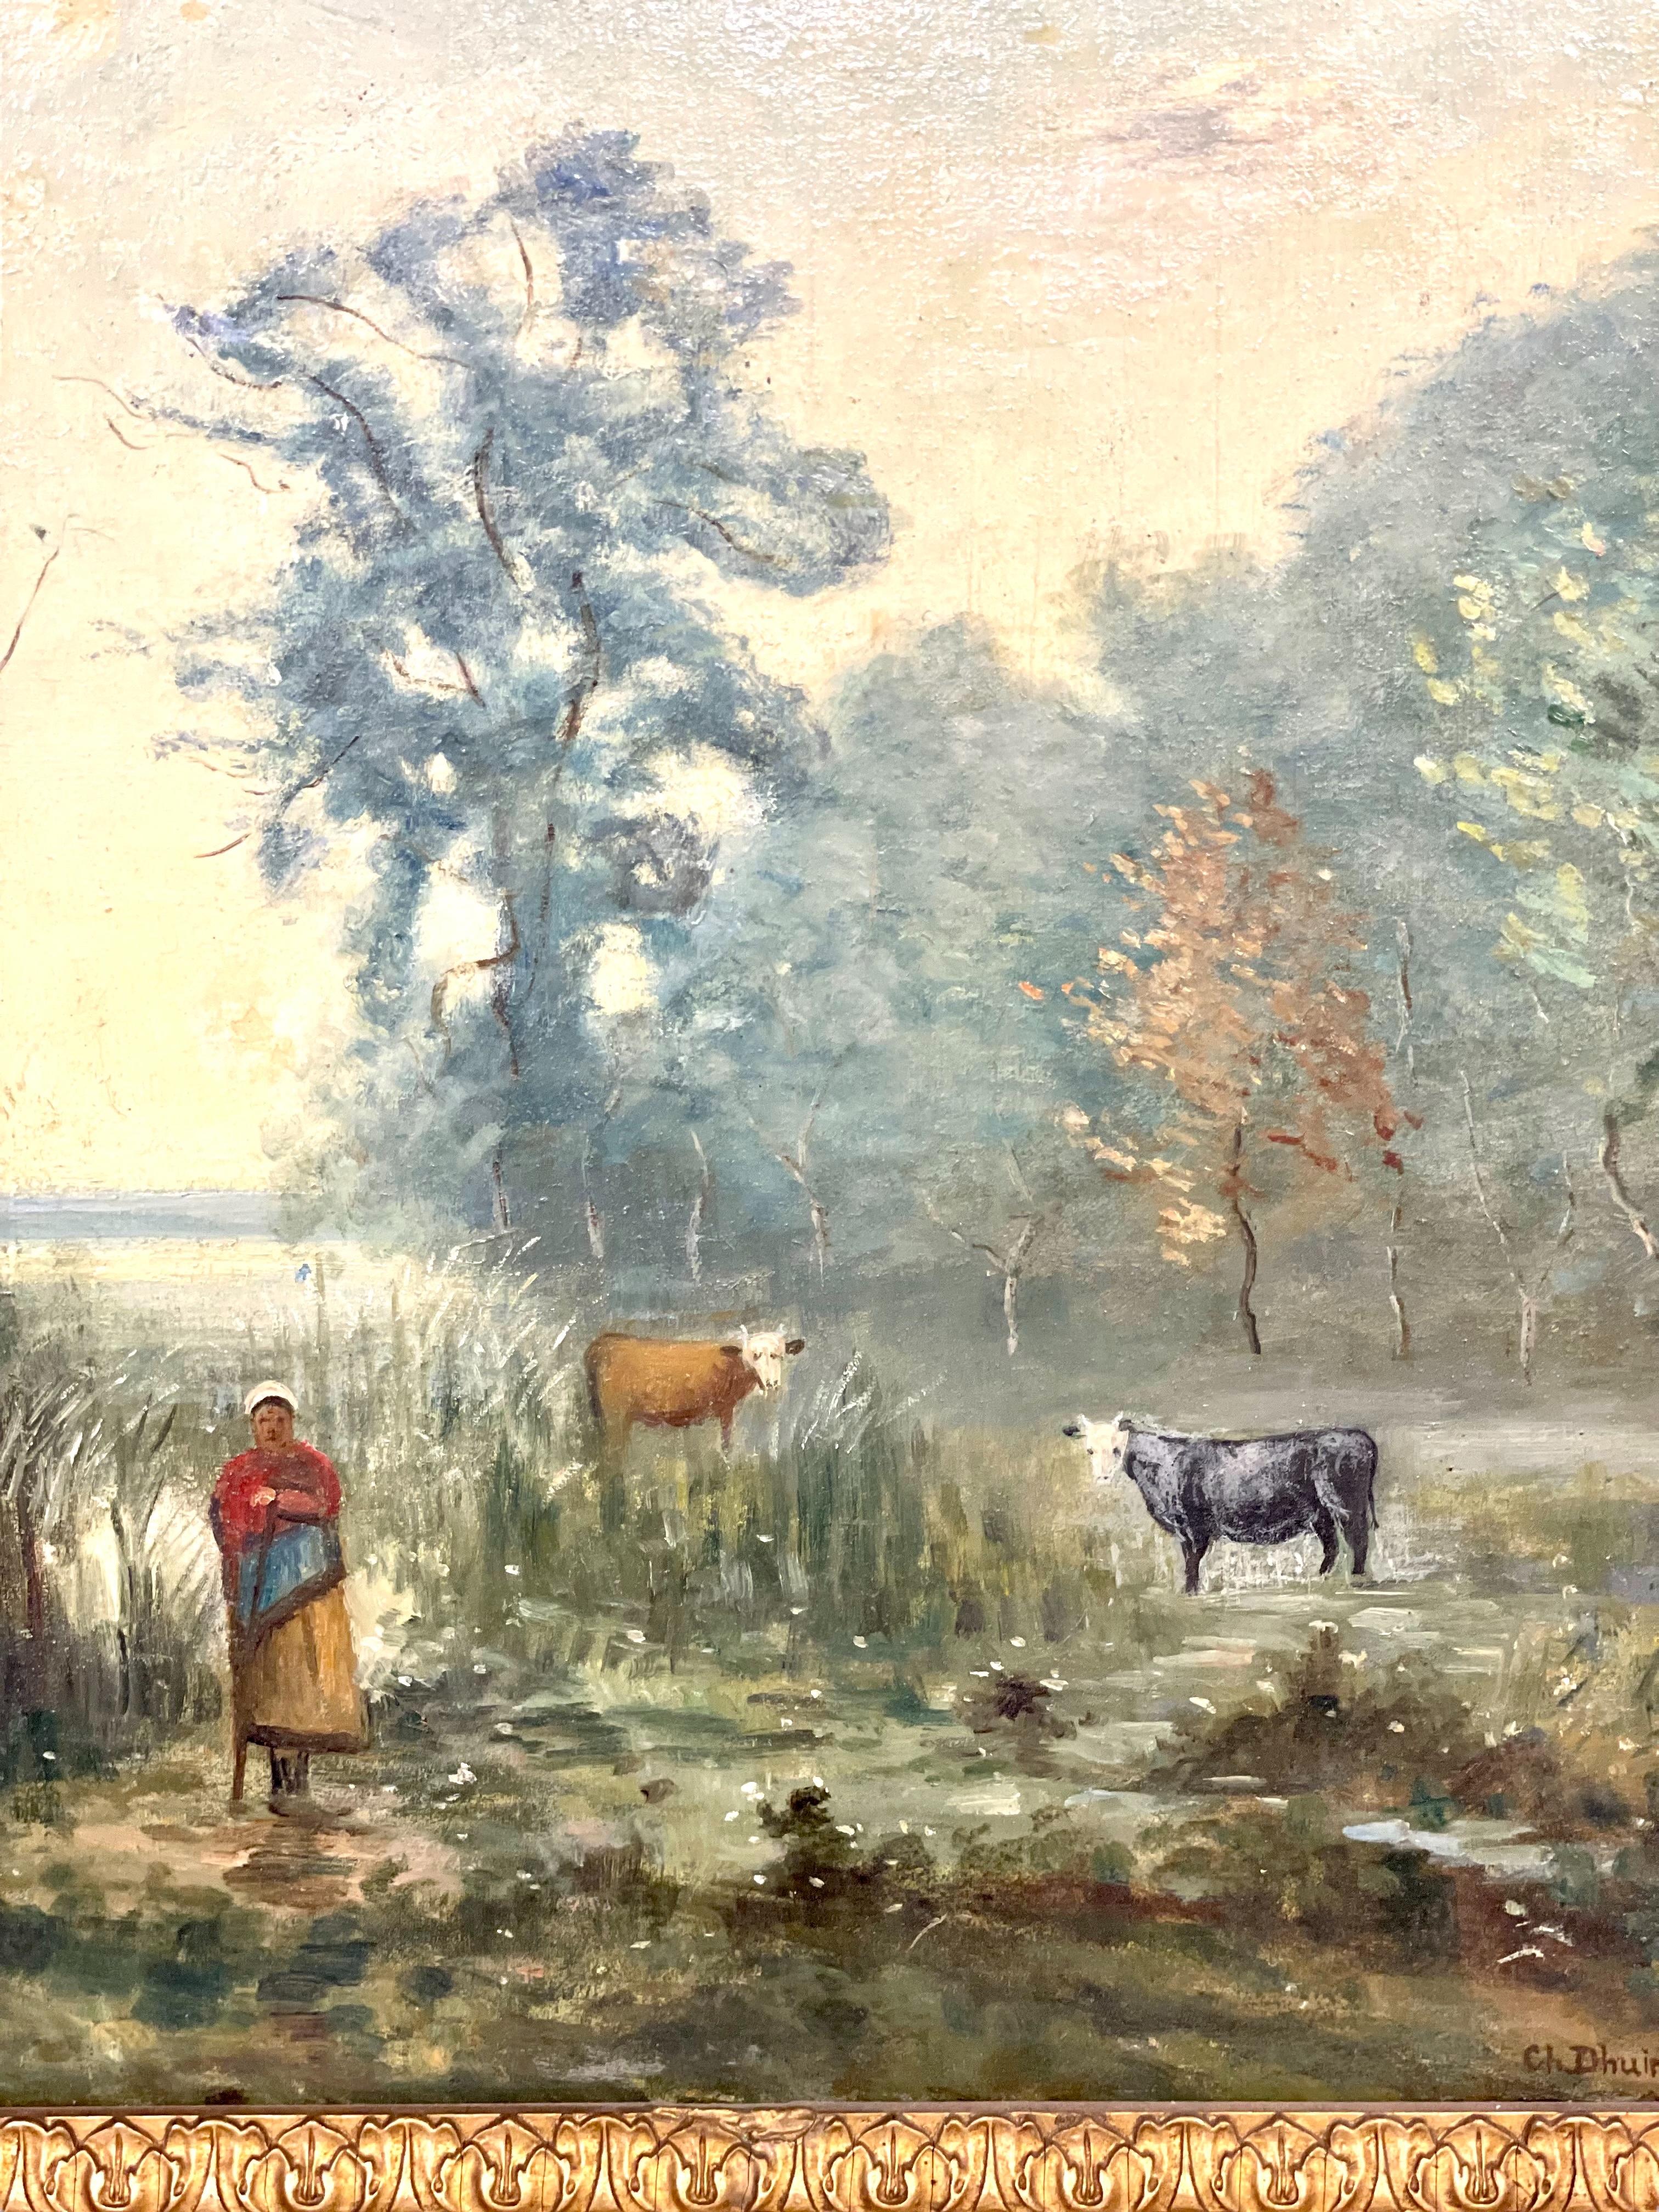 Oil on panel: 'The Cowherder by the Pond', by Charles Dhuin, painted around the end of the 19th century, and signed in its lower right corner. This idyllic pastoral scene, with its luminous sky and finely detailed characters, represents a snapshot